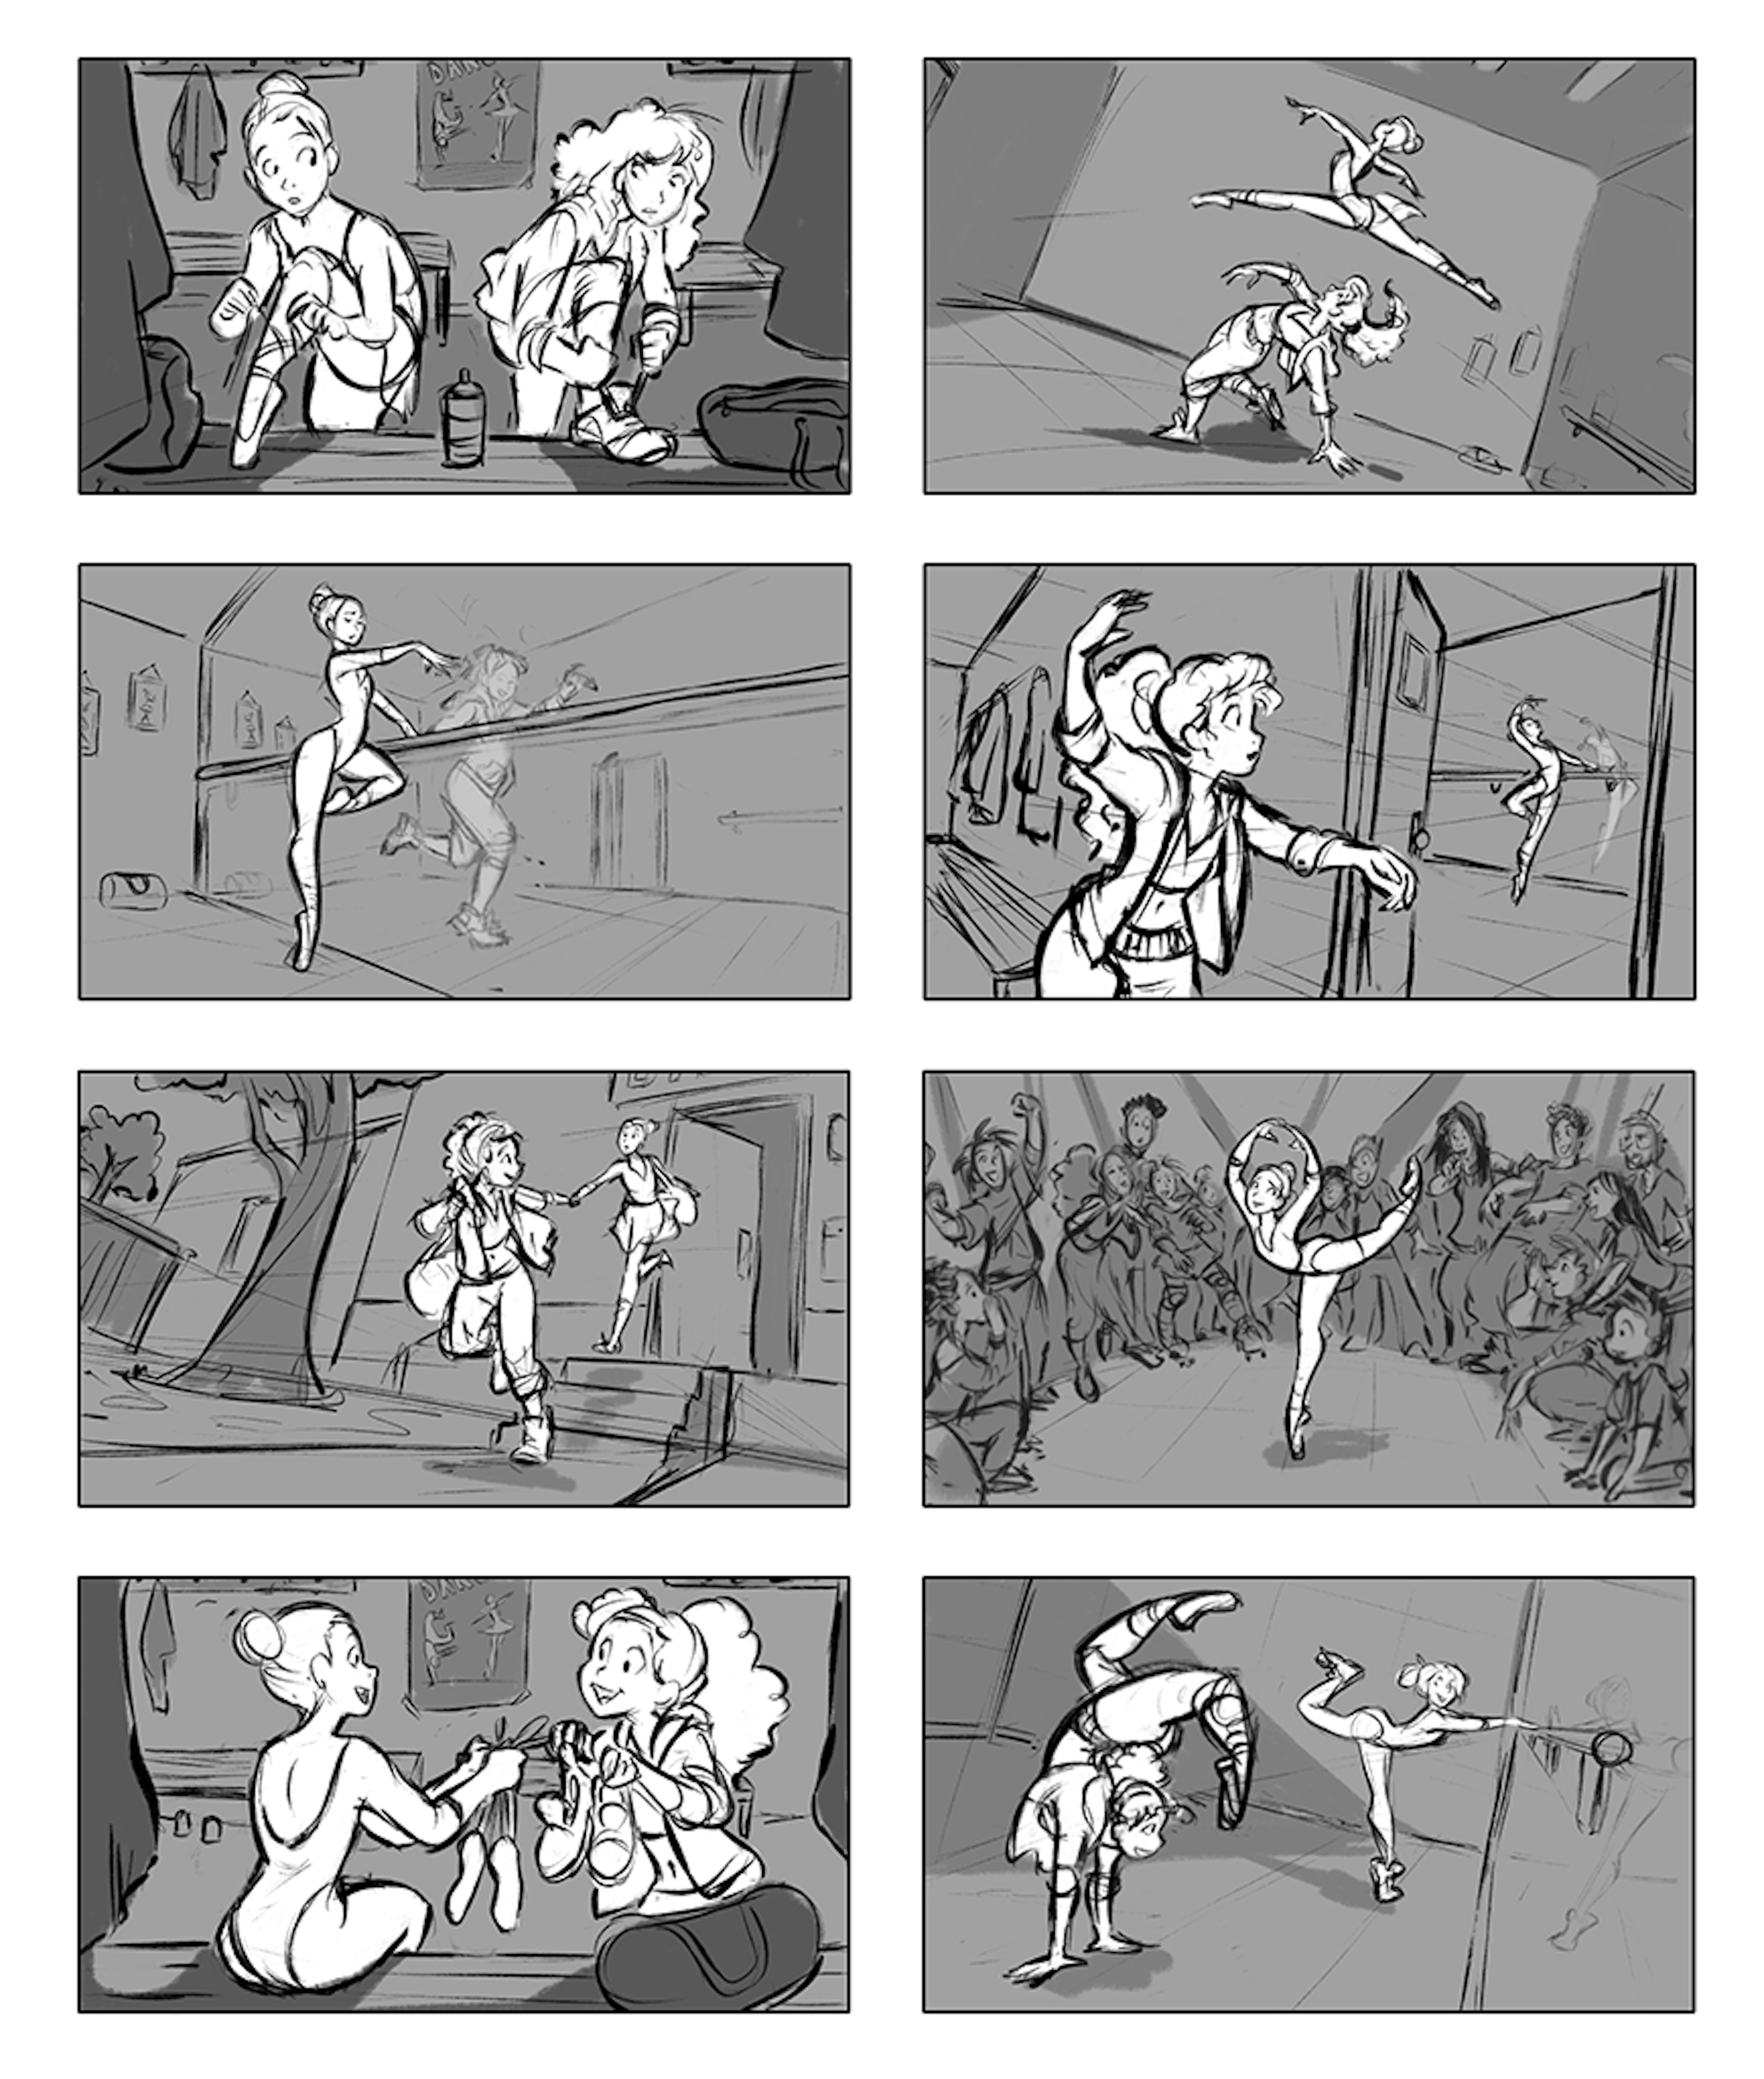 Storyboard of a dancing sequence